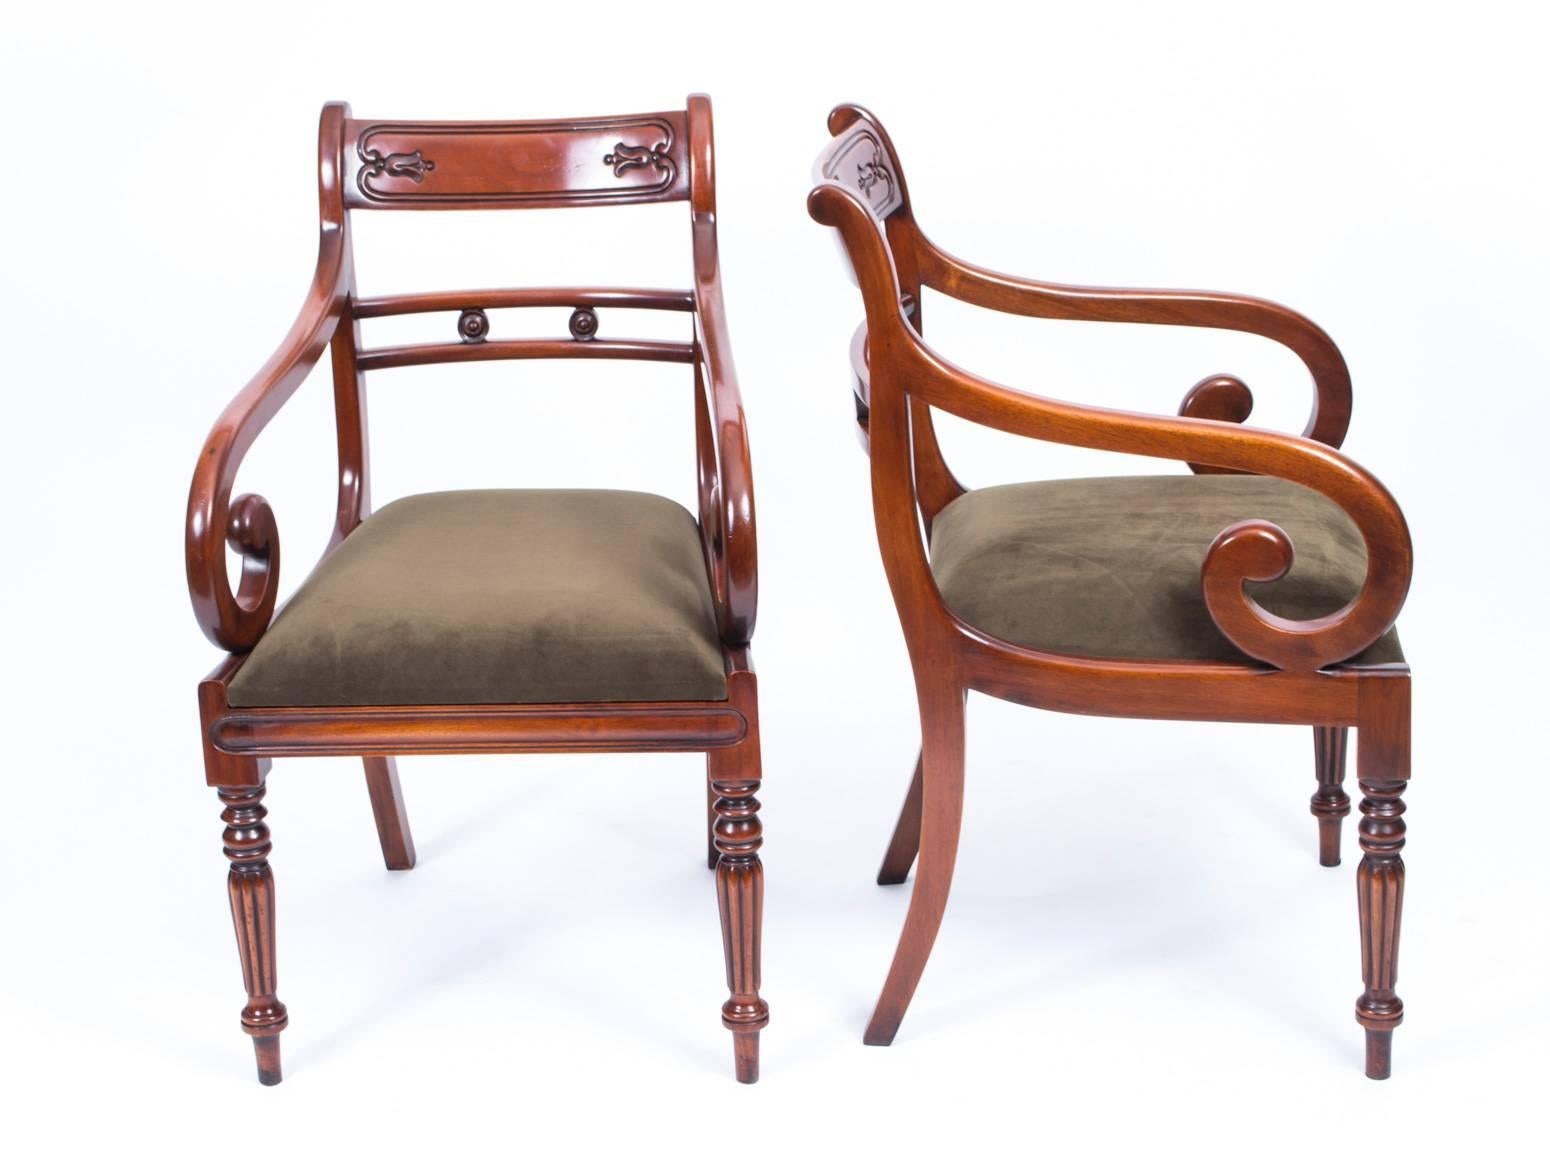 An absolutely fantastic English made set of ten Regency style dining chairs, dating from the last quarter of the 20th century.

These chairs have been masterfully crafted in beautiful solid flame mahogany throughout and the finish and attention to